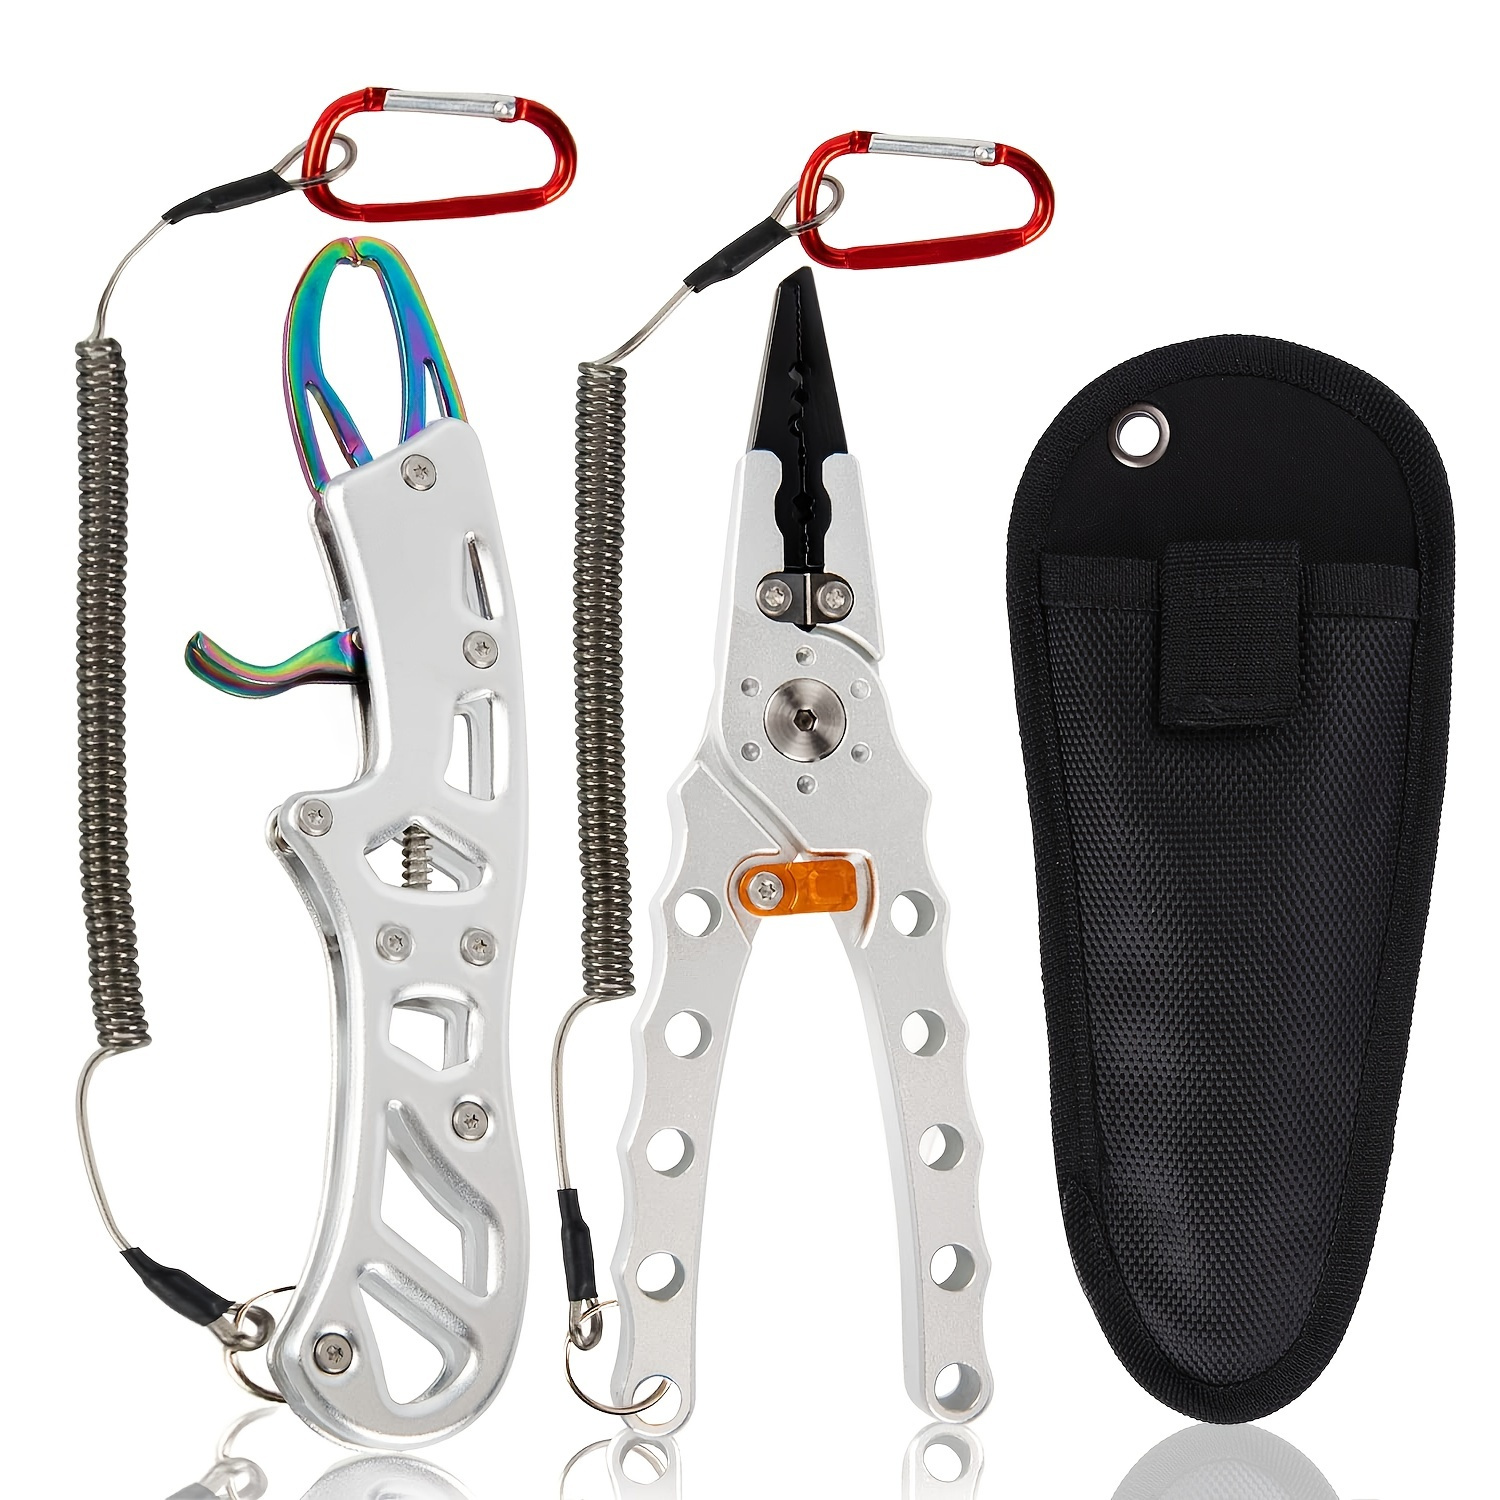 Fishing Pliers Gripper,Fishing Claw Tong Grip,Metal Fish Control Clamp Claw  Tong Grip,Portable Fishing Pliers Fish Catching Pliers,Fish Control Device